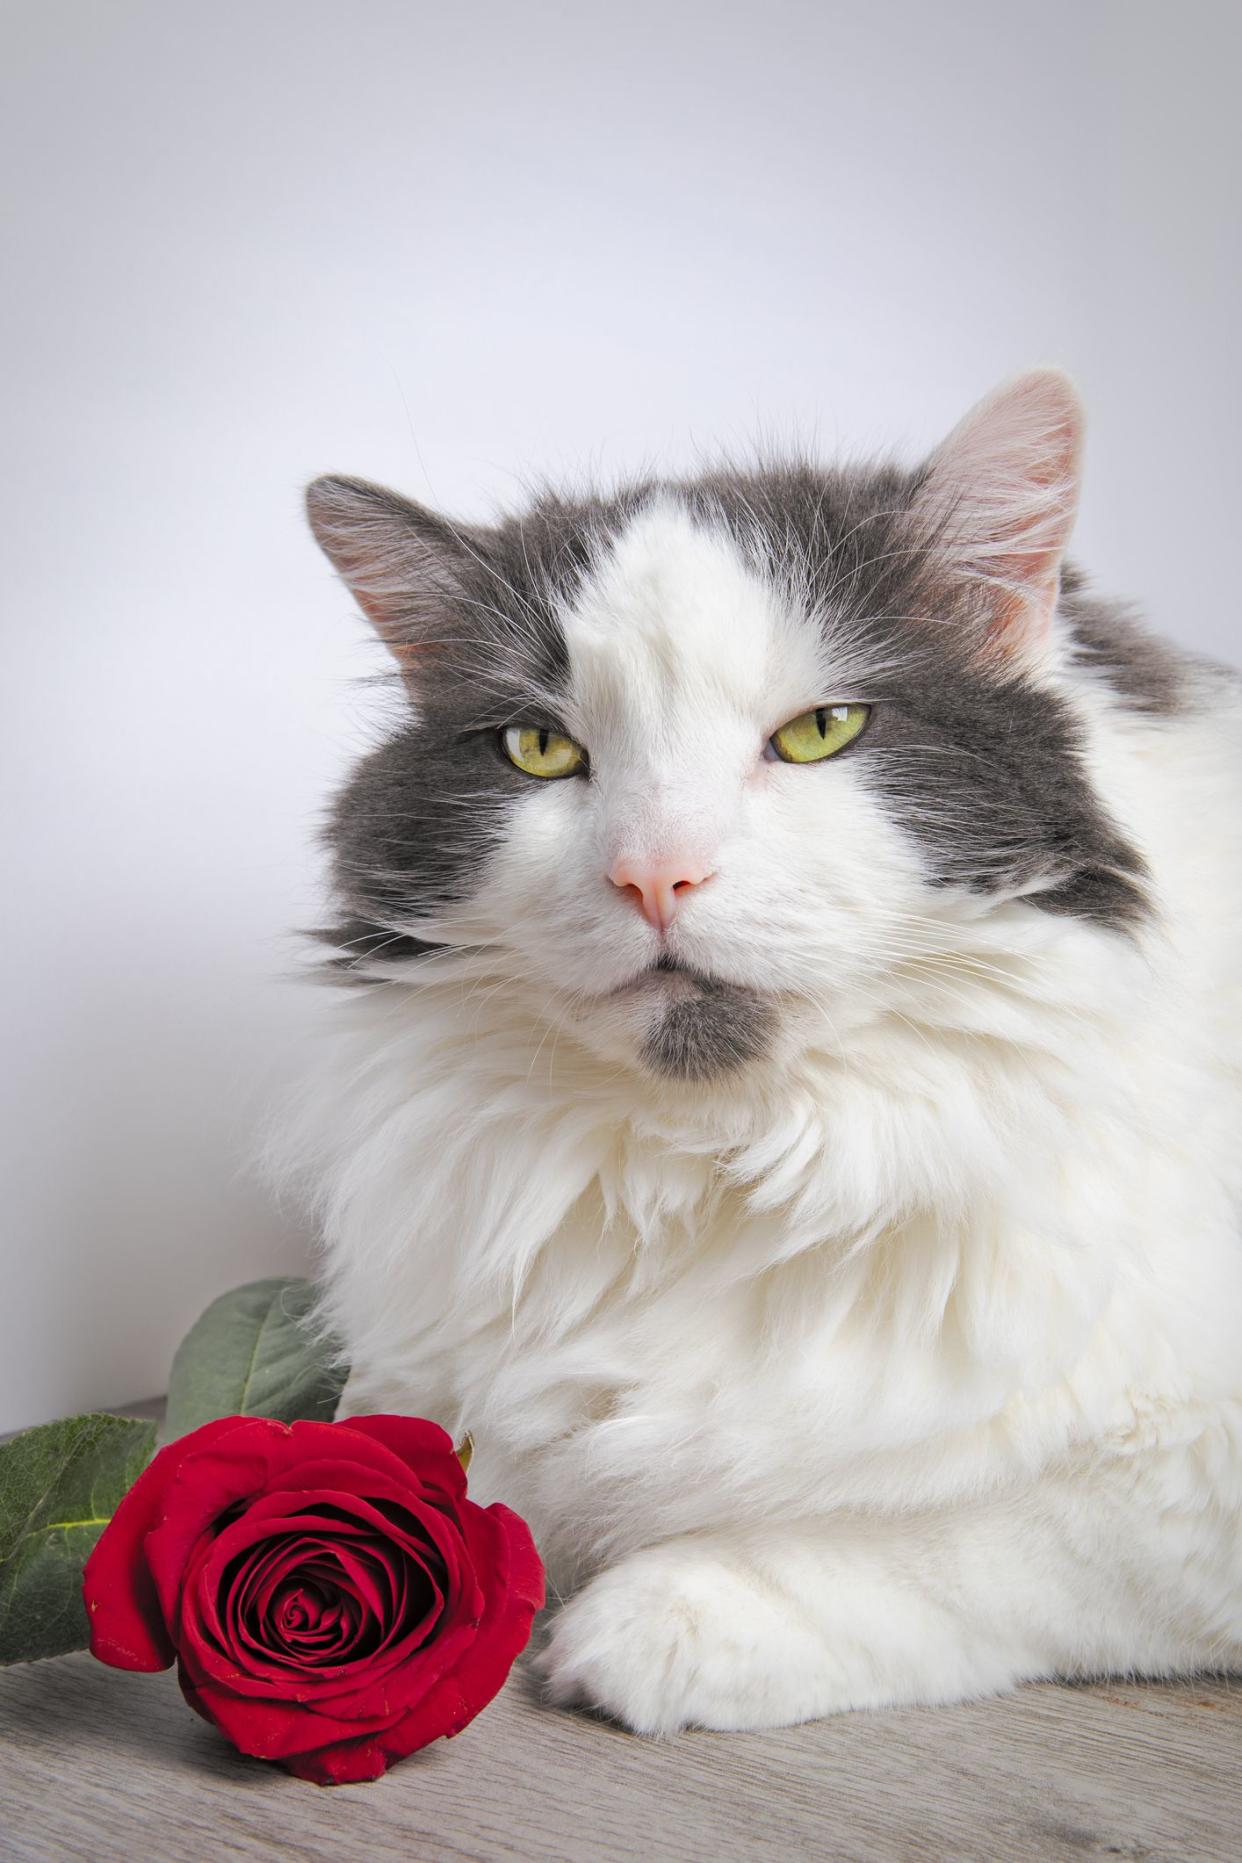 A portrait of a pretty cat with a red rose.